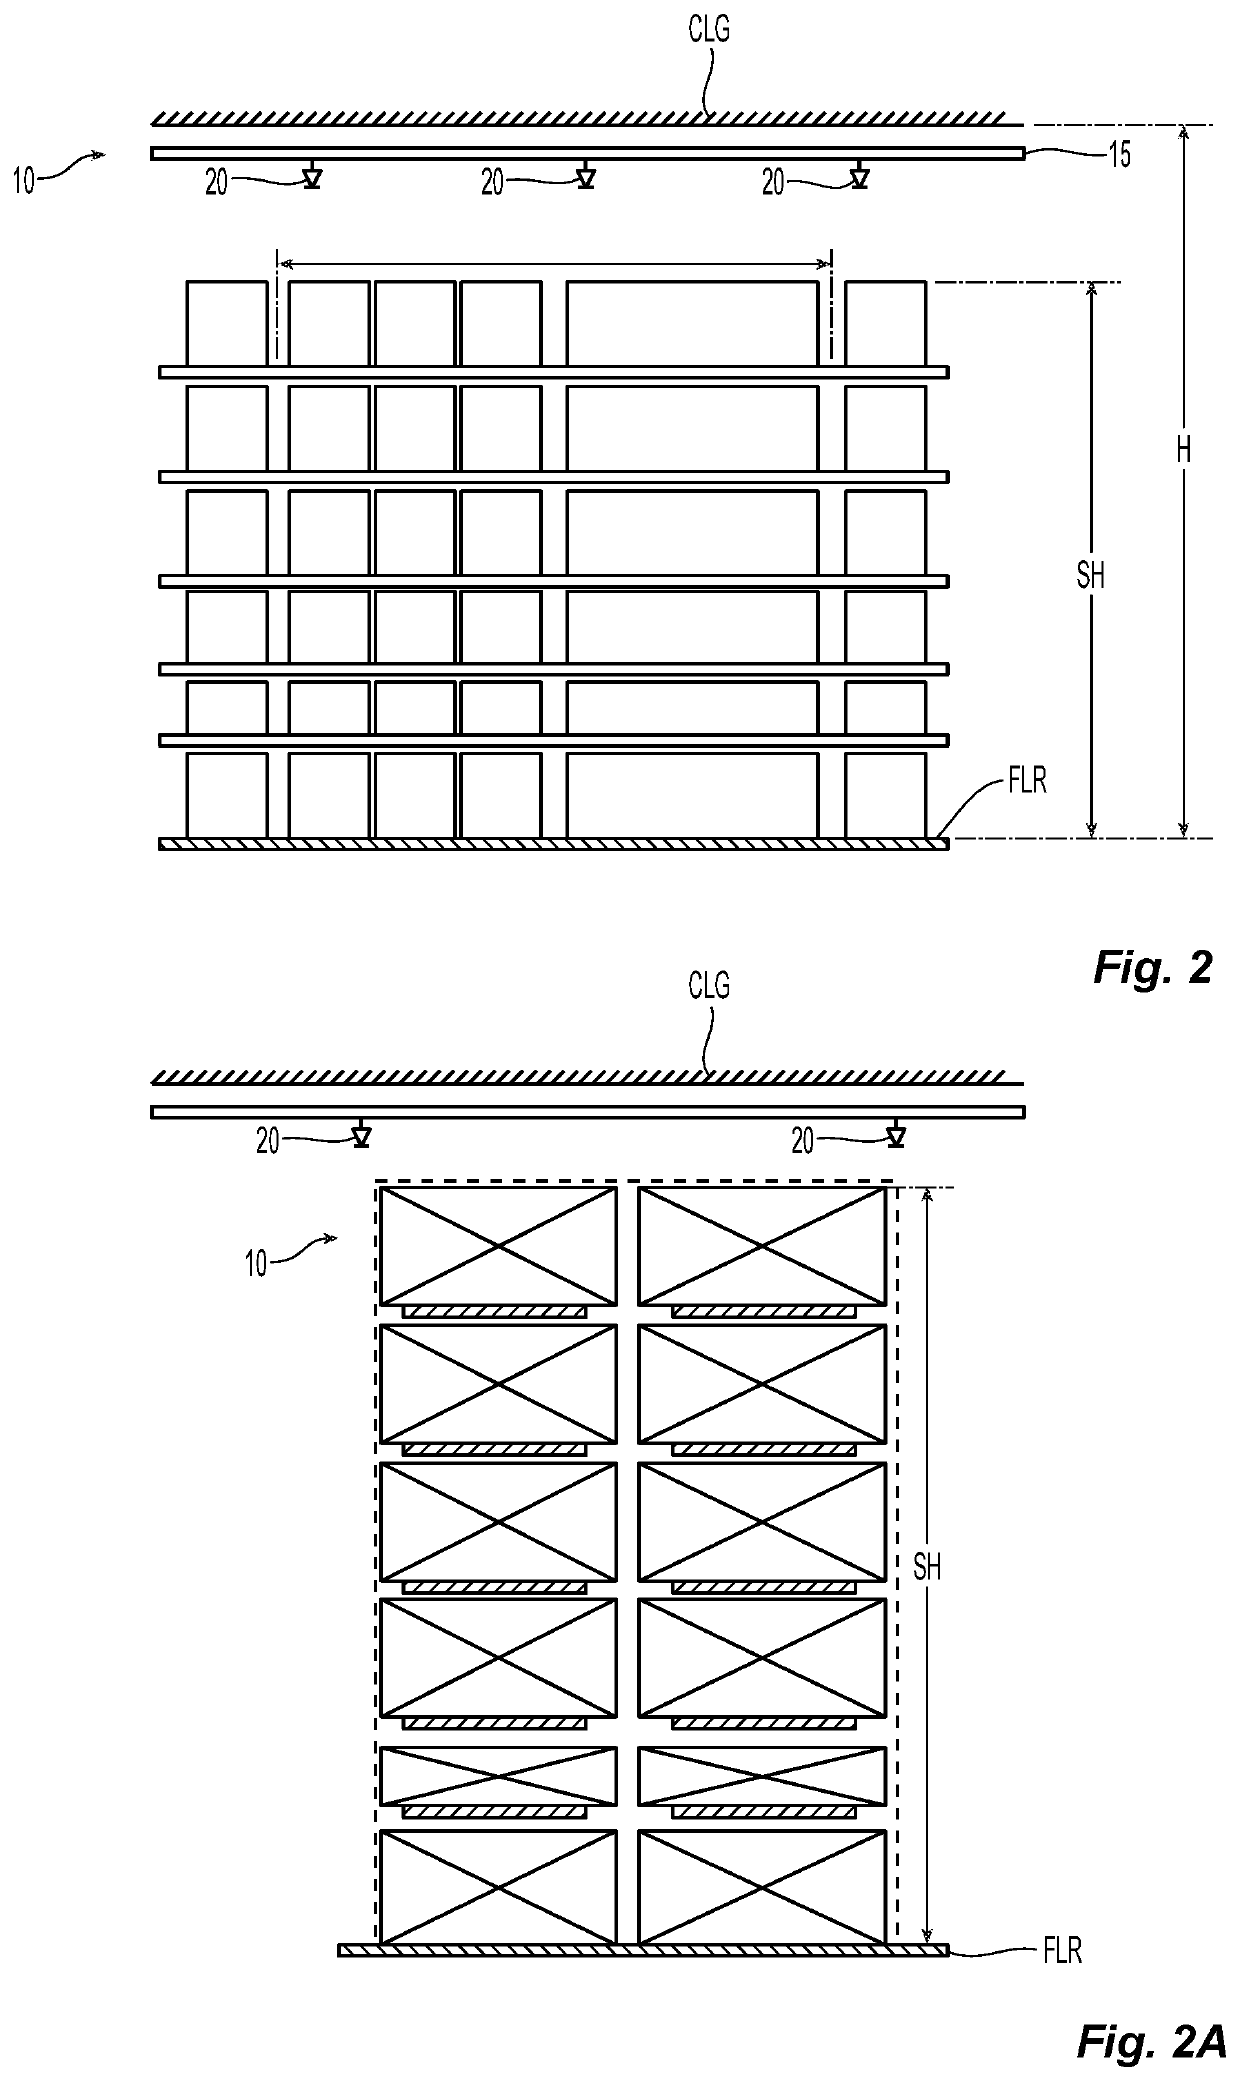 Automatic Fire Sprinklers, Systems and Methods for Suppression Fire Protection of High Hazard Commodities Including Commodities Stored in Rack Arrangements Beneath Ceilings of Up to Fifty-Five Feet in Height